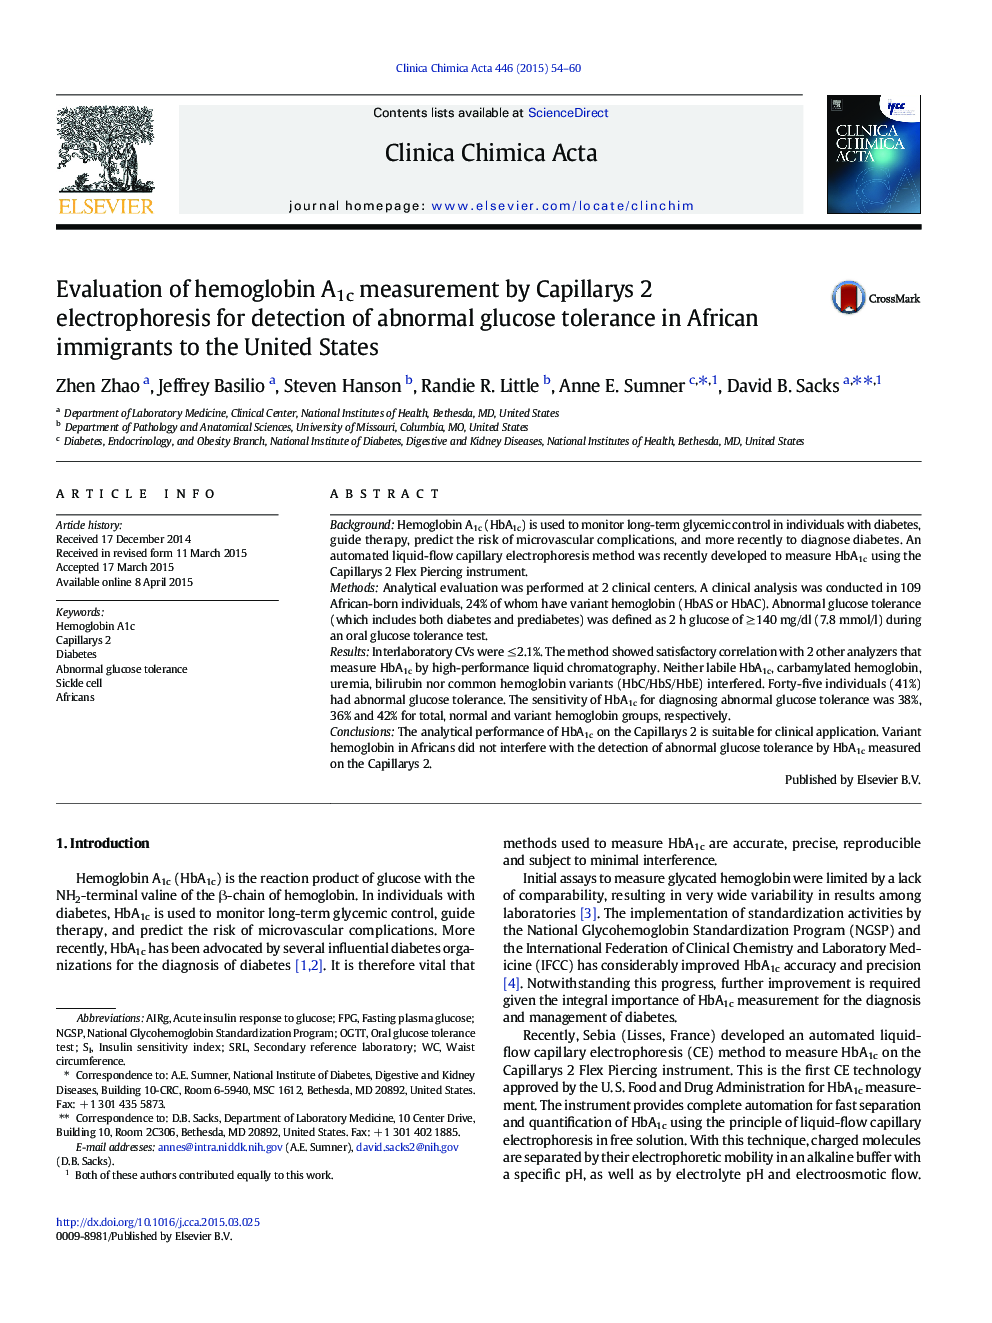 Evaluation of hemoglobin A1c measurement by Capillarys 2 electrophoresis for detection of abnormal glucose tolerance in African immigrants to the United States